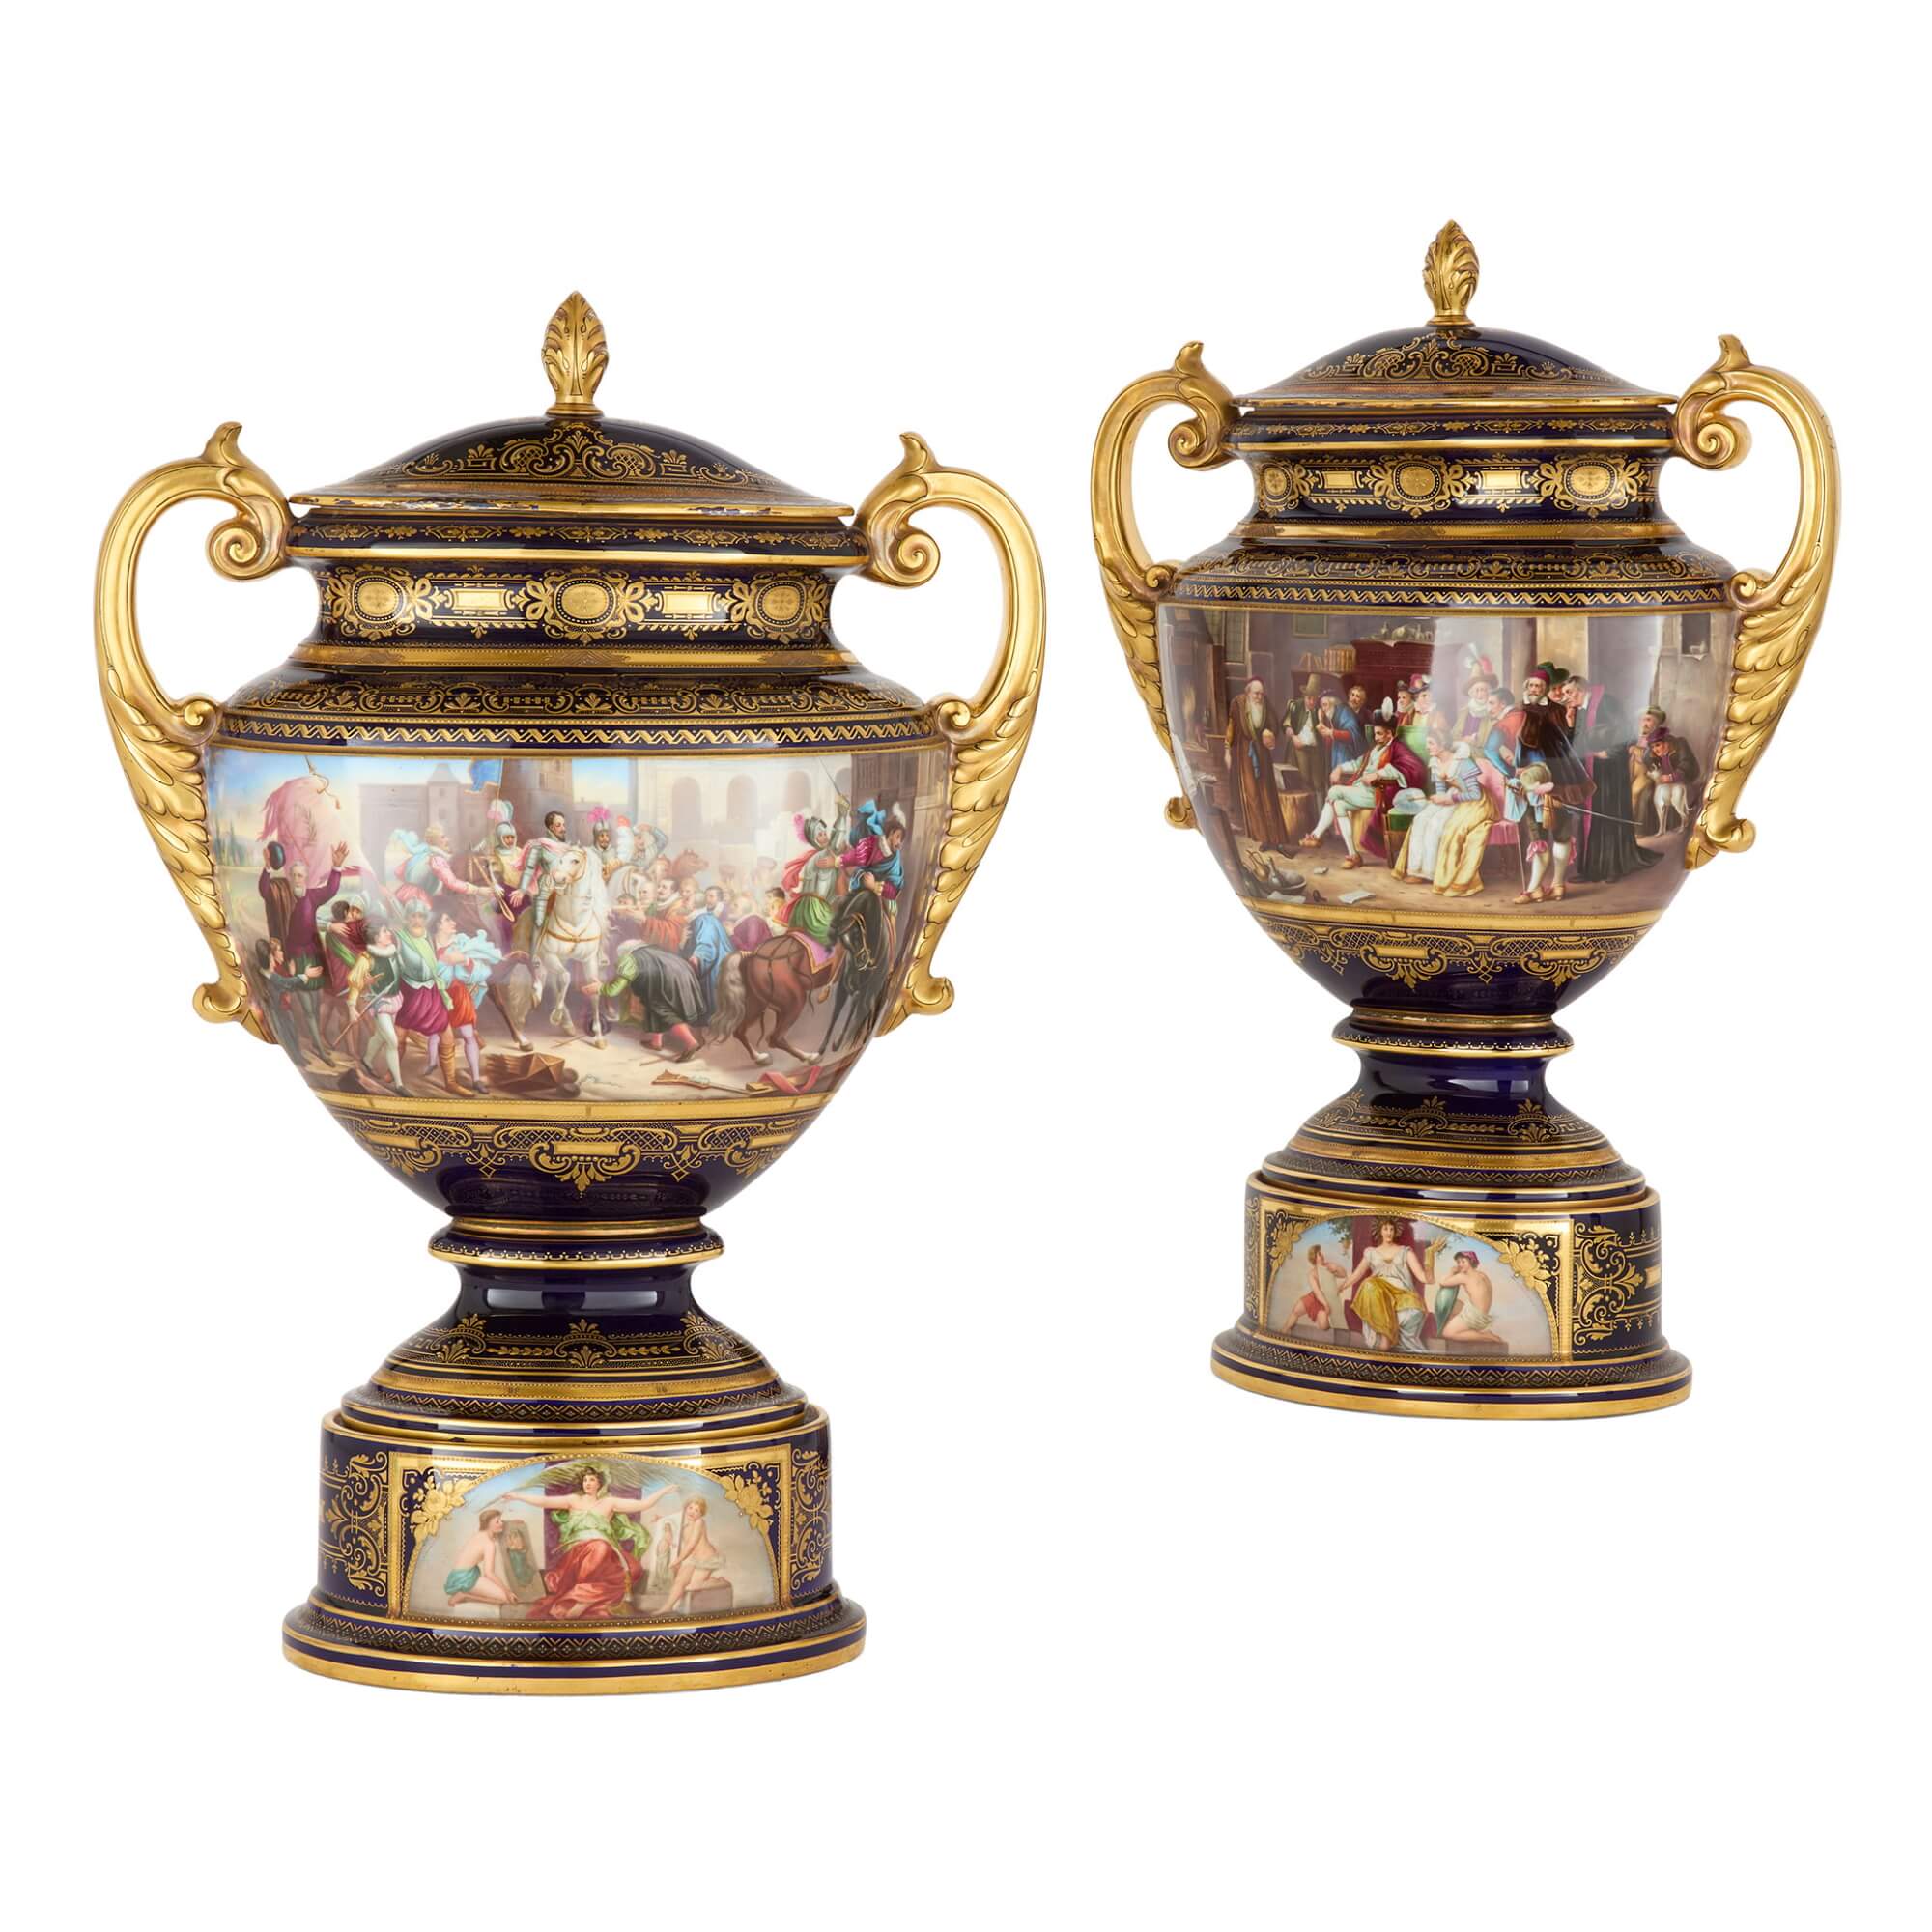 Gilt Vases and Vessels